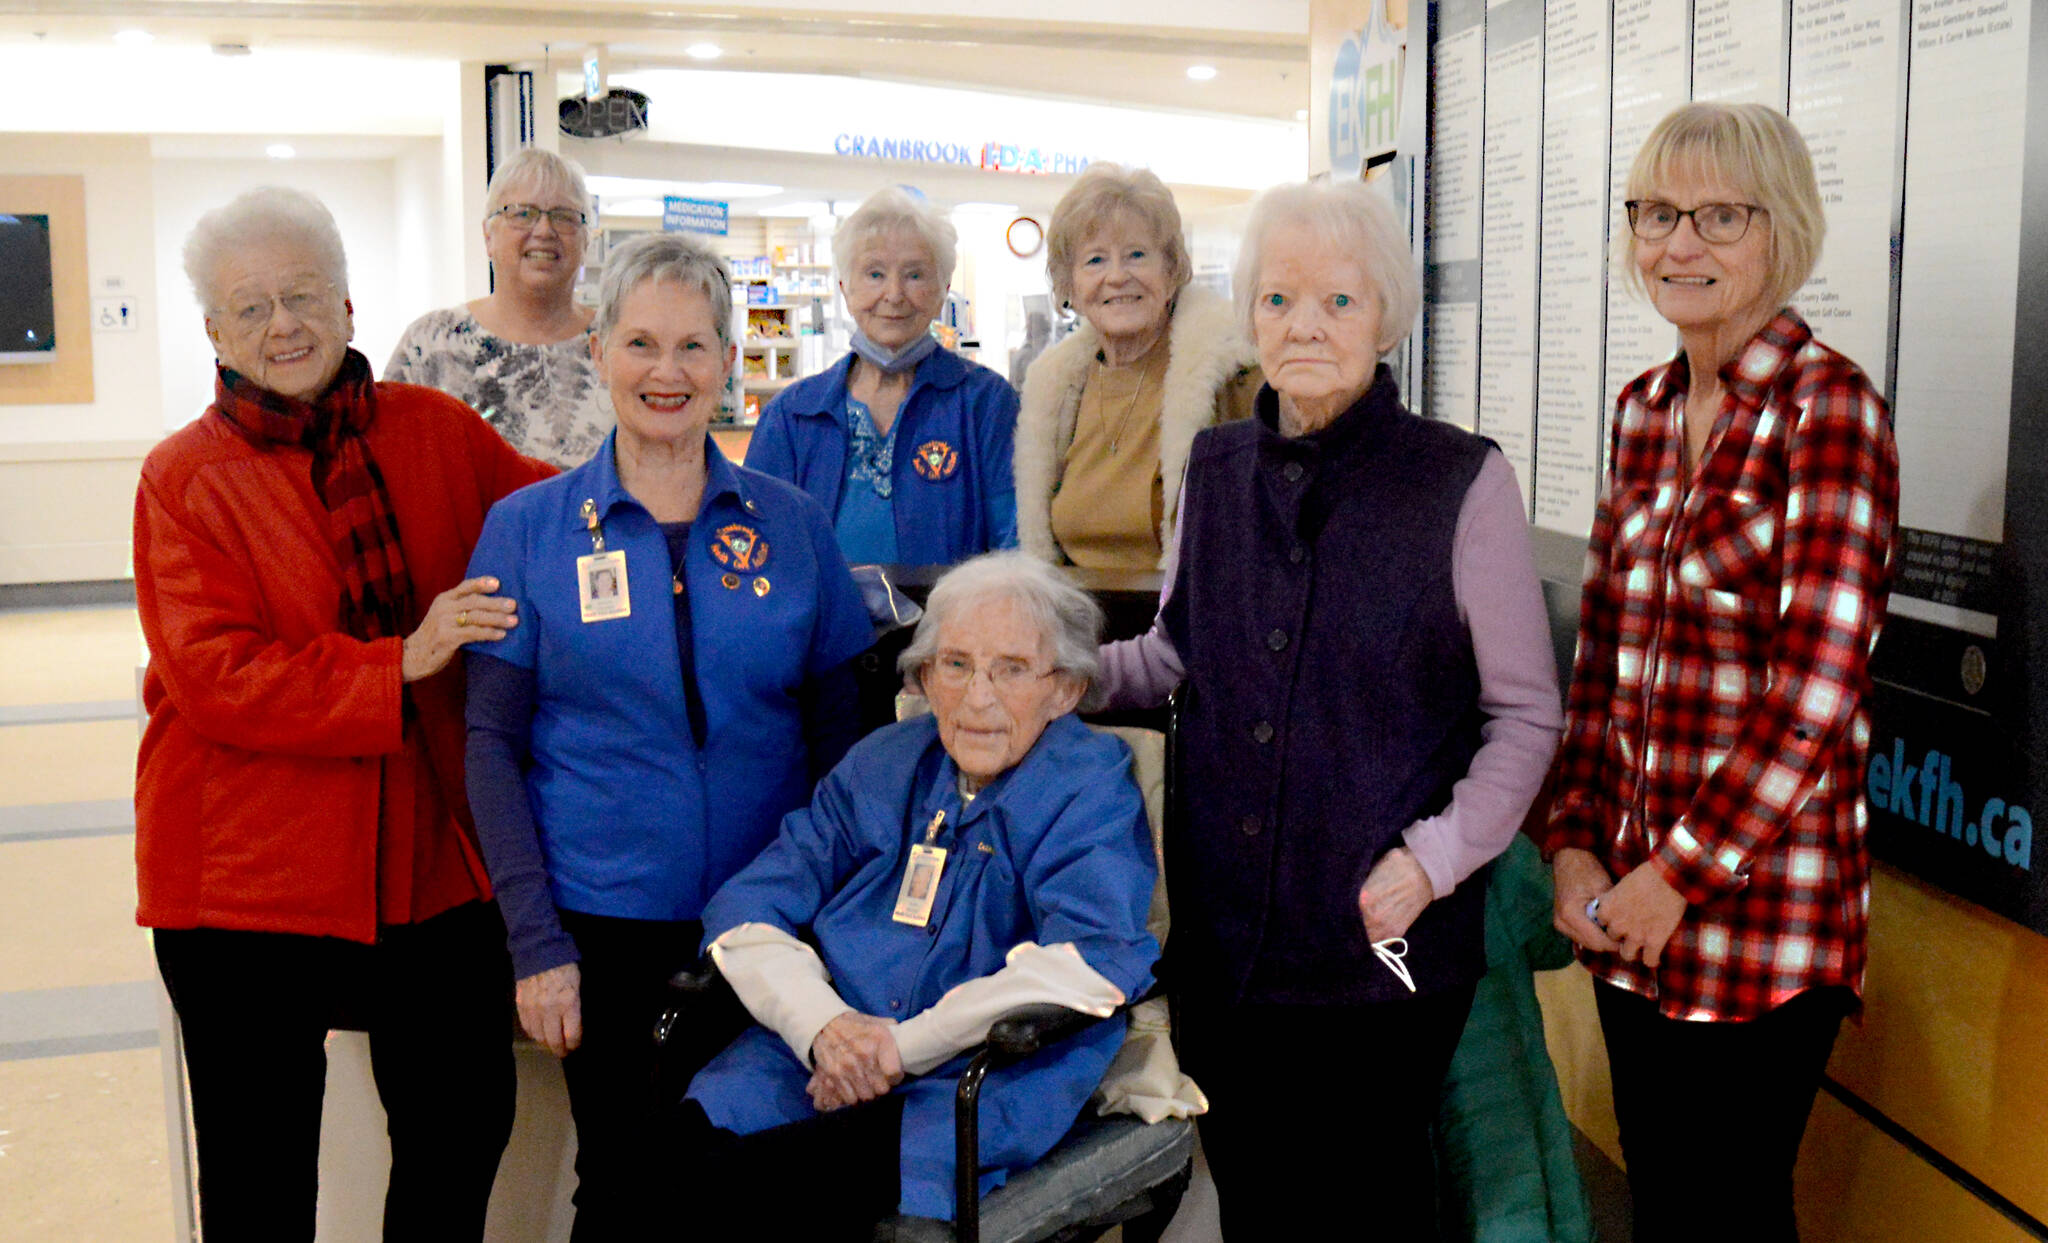 At right: Edith Rose (front, centre) was joined at the East Kootenay Regional Hospital by members of the Cranbrook Health Care Auxiliary. Left to right: Evelyn Botterill, Janice Gauthier, Dianne Camilli, Kate Fox, Odette Rouse, Diane Greaves, Linda Foster. (Barry Coulter photo)